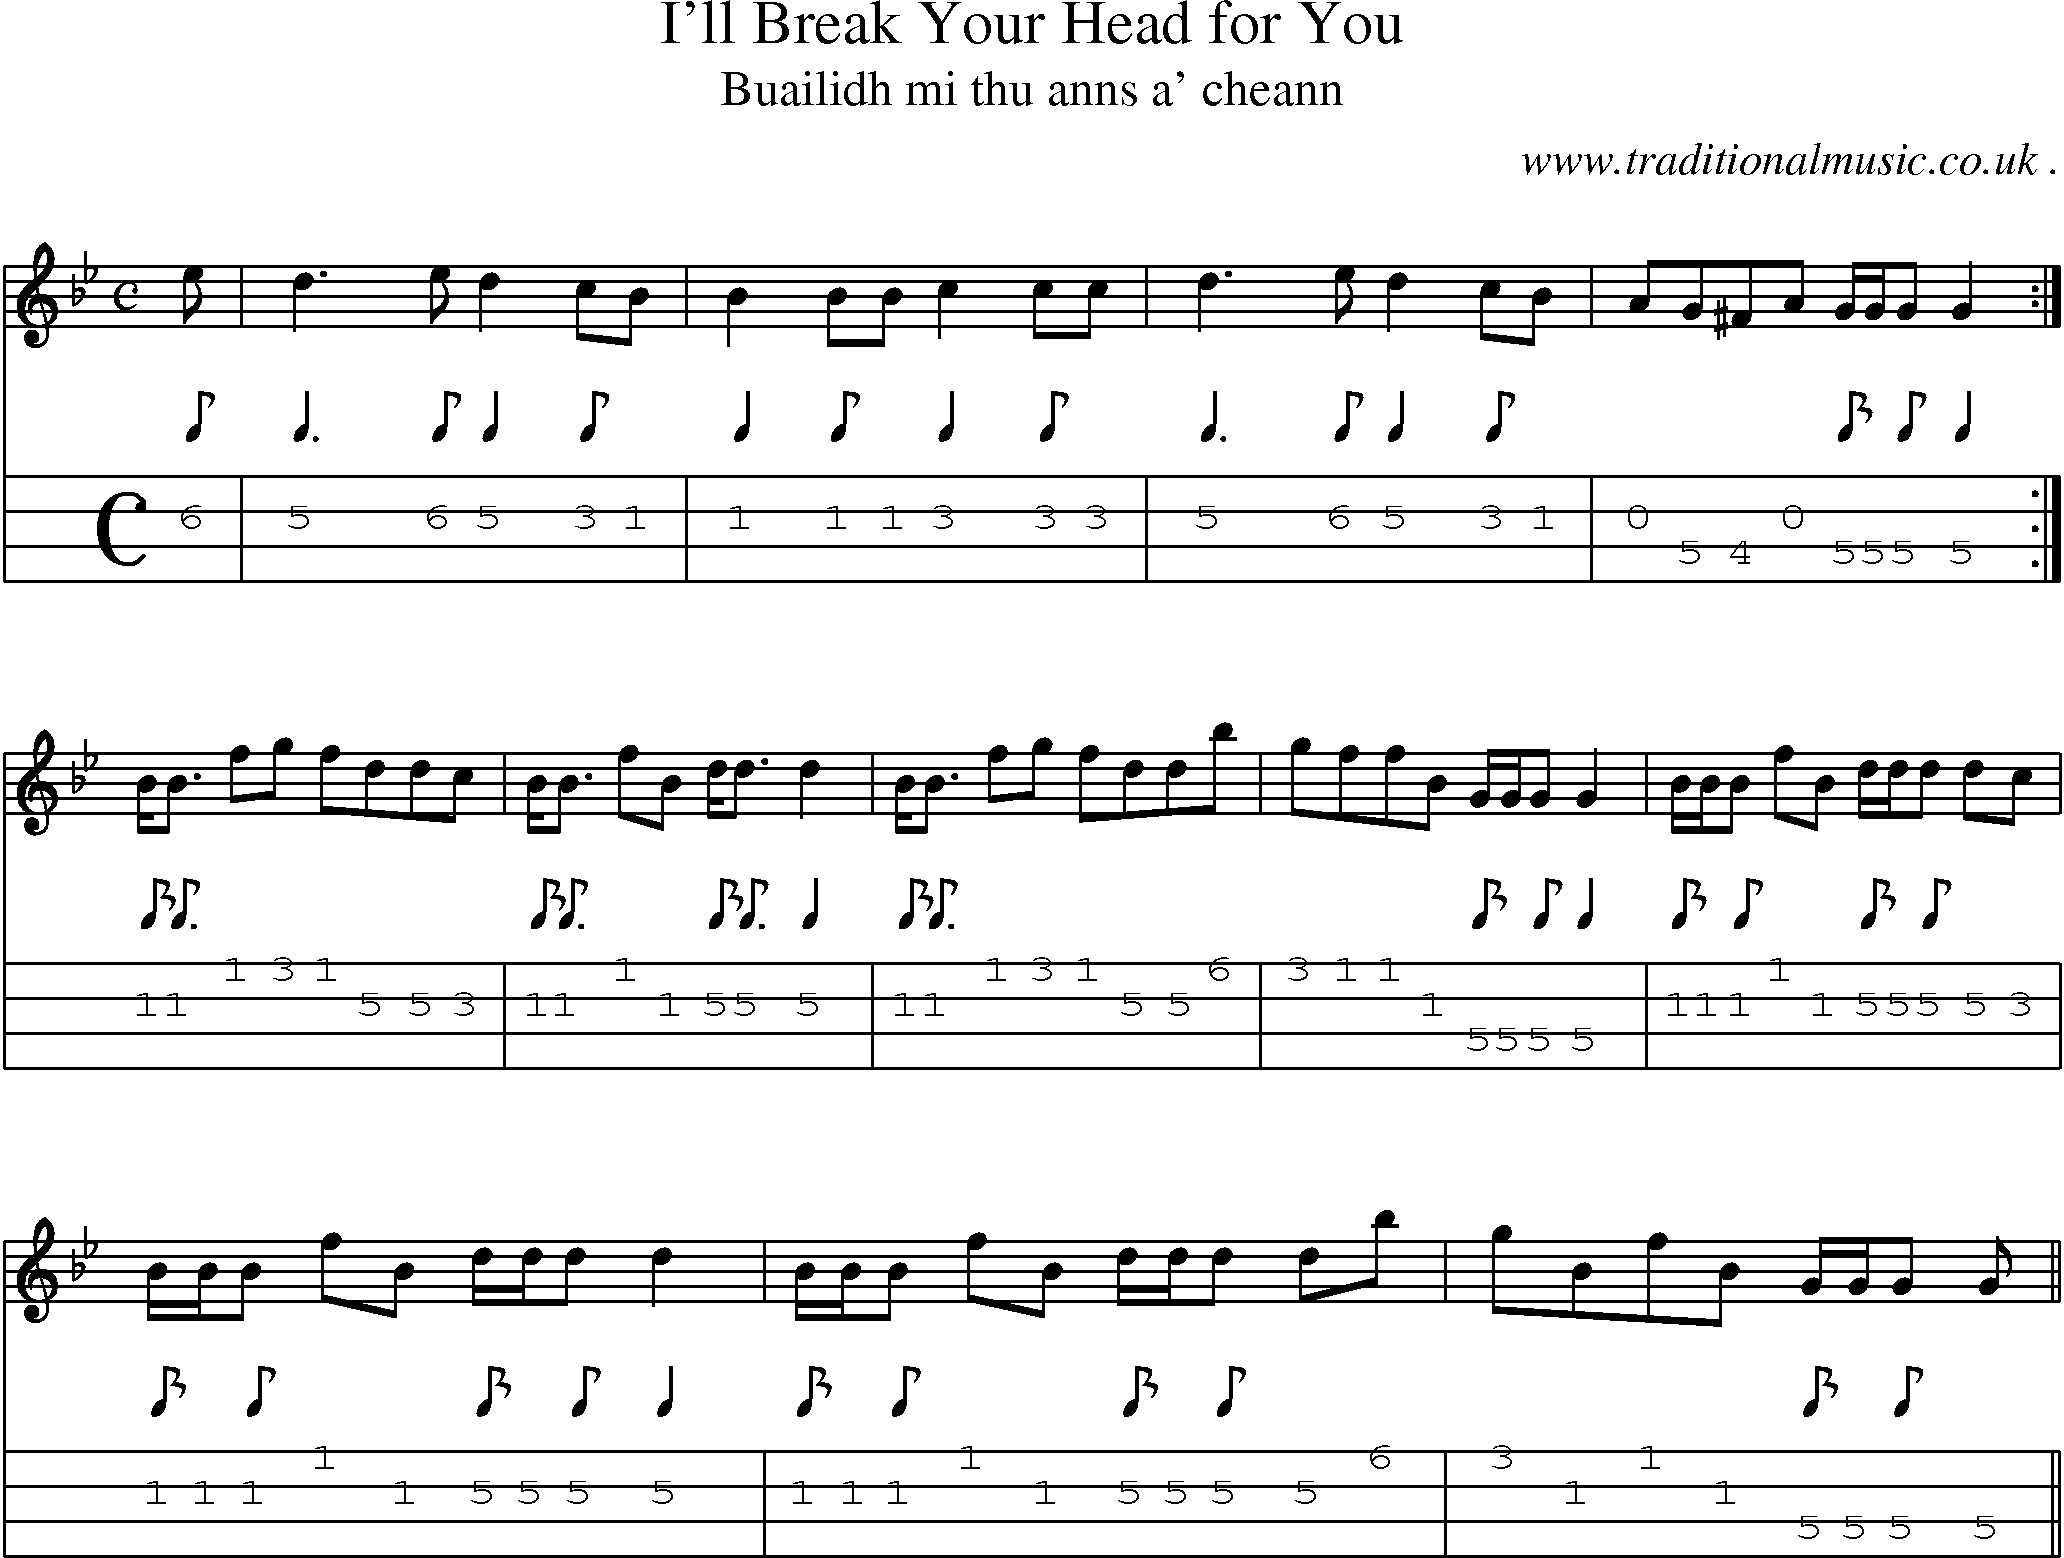 Sheet-music  score, Chords and Mandolin Tabs for Ill Break Your Head For You